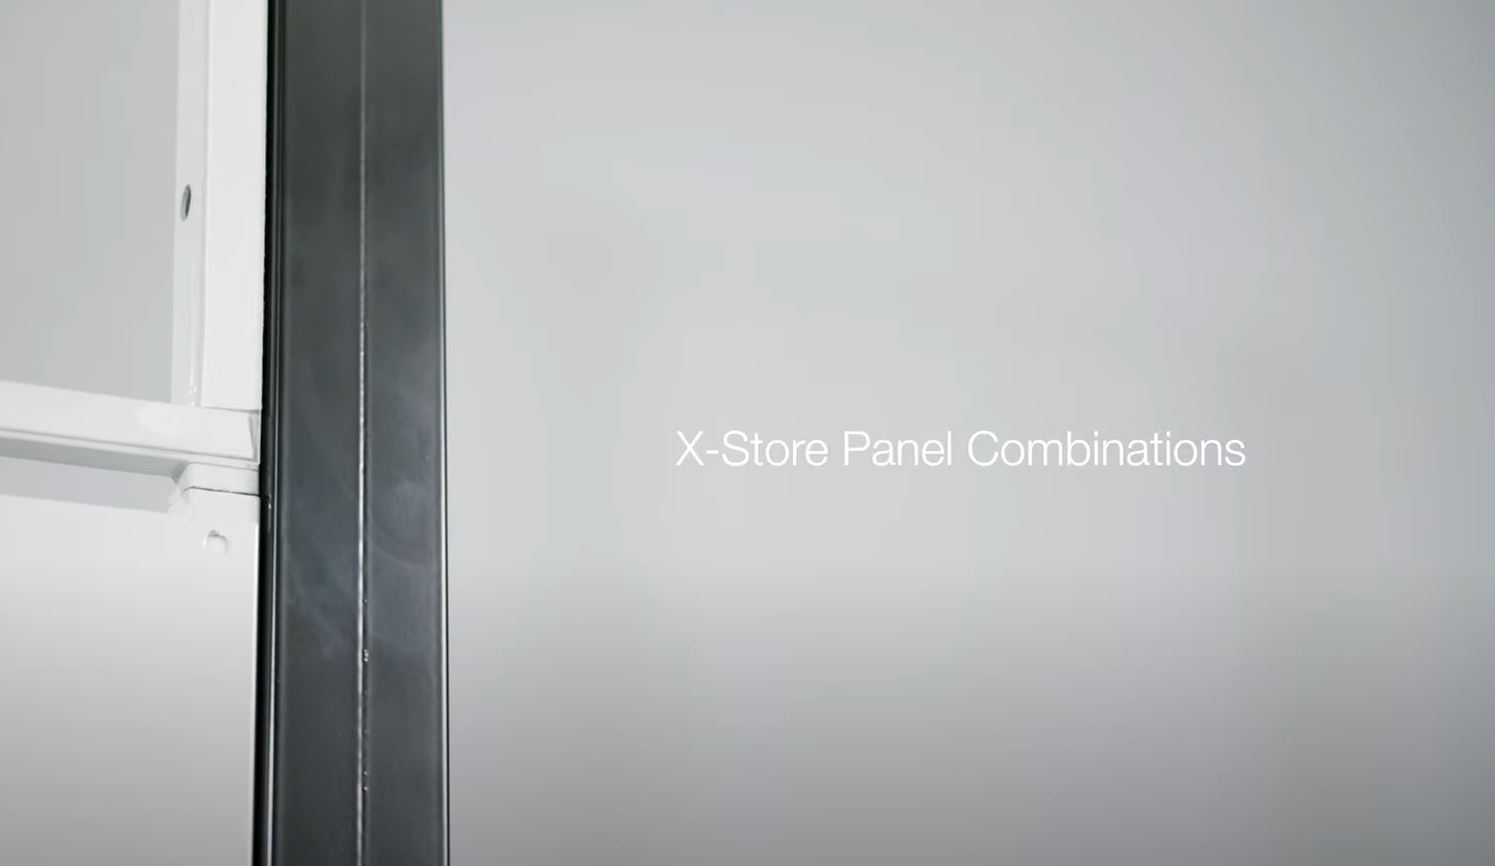 axelent assembly instructions x-store panel combinations